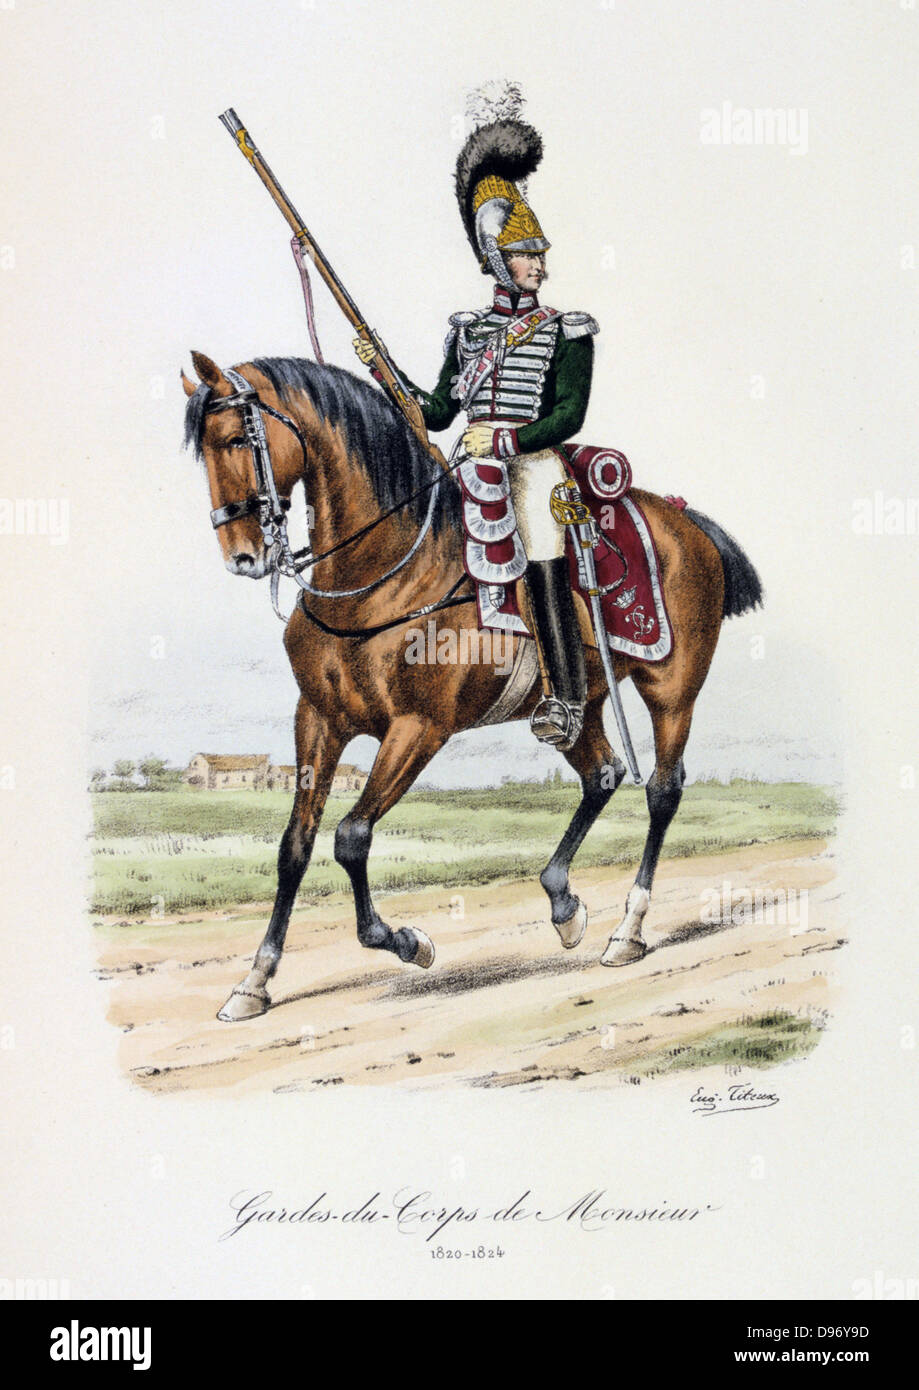 Mounted officerof the bodyguard of the heir to the throne, 1820-1824. From 'Histoire de la maison militaire du Roi de 1814 a 1830' by Eugene Titeux, Paris, 1890. Stock Photo